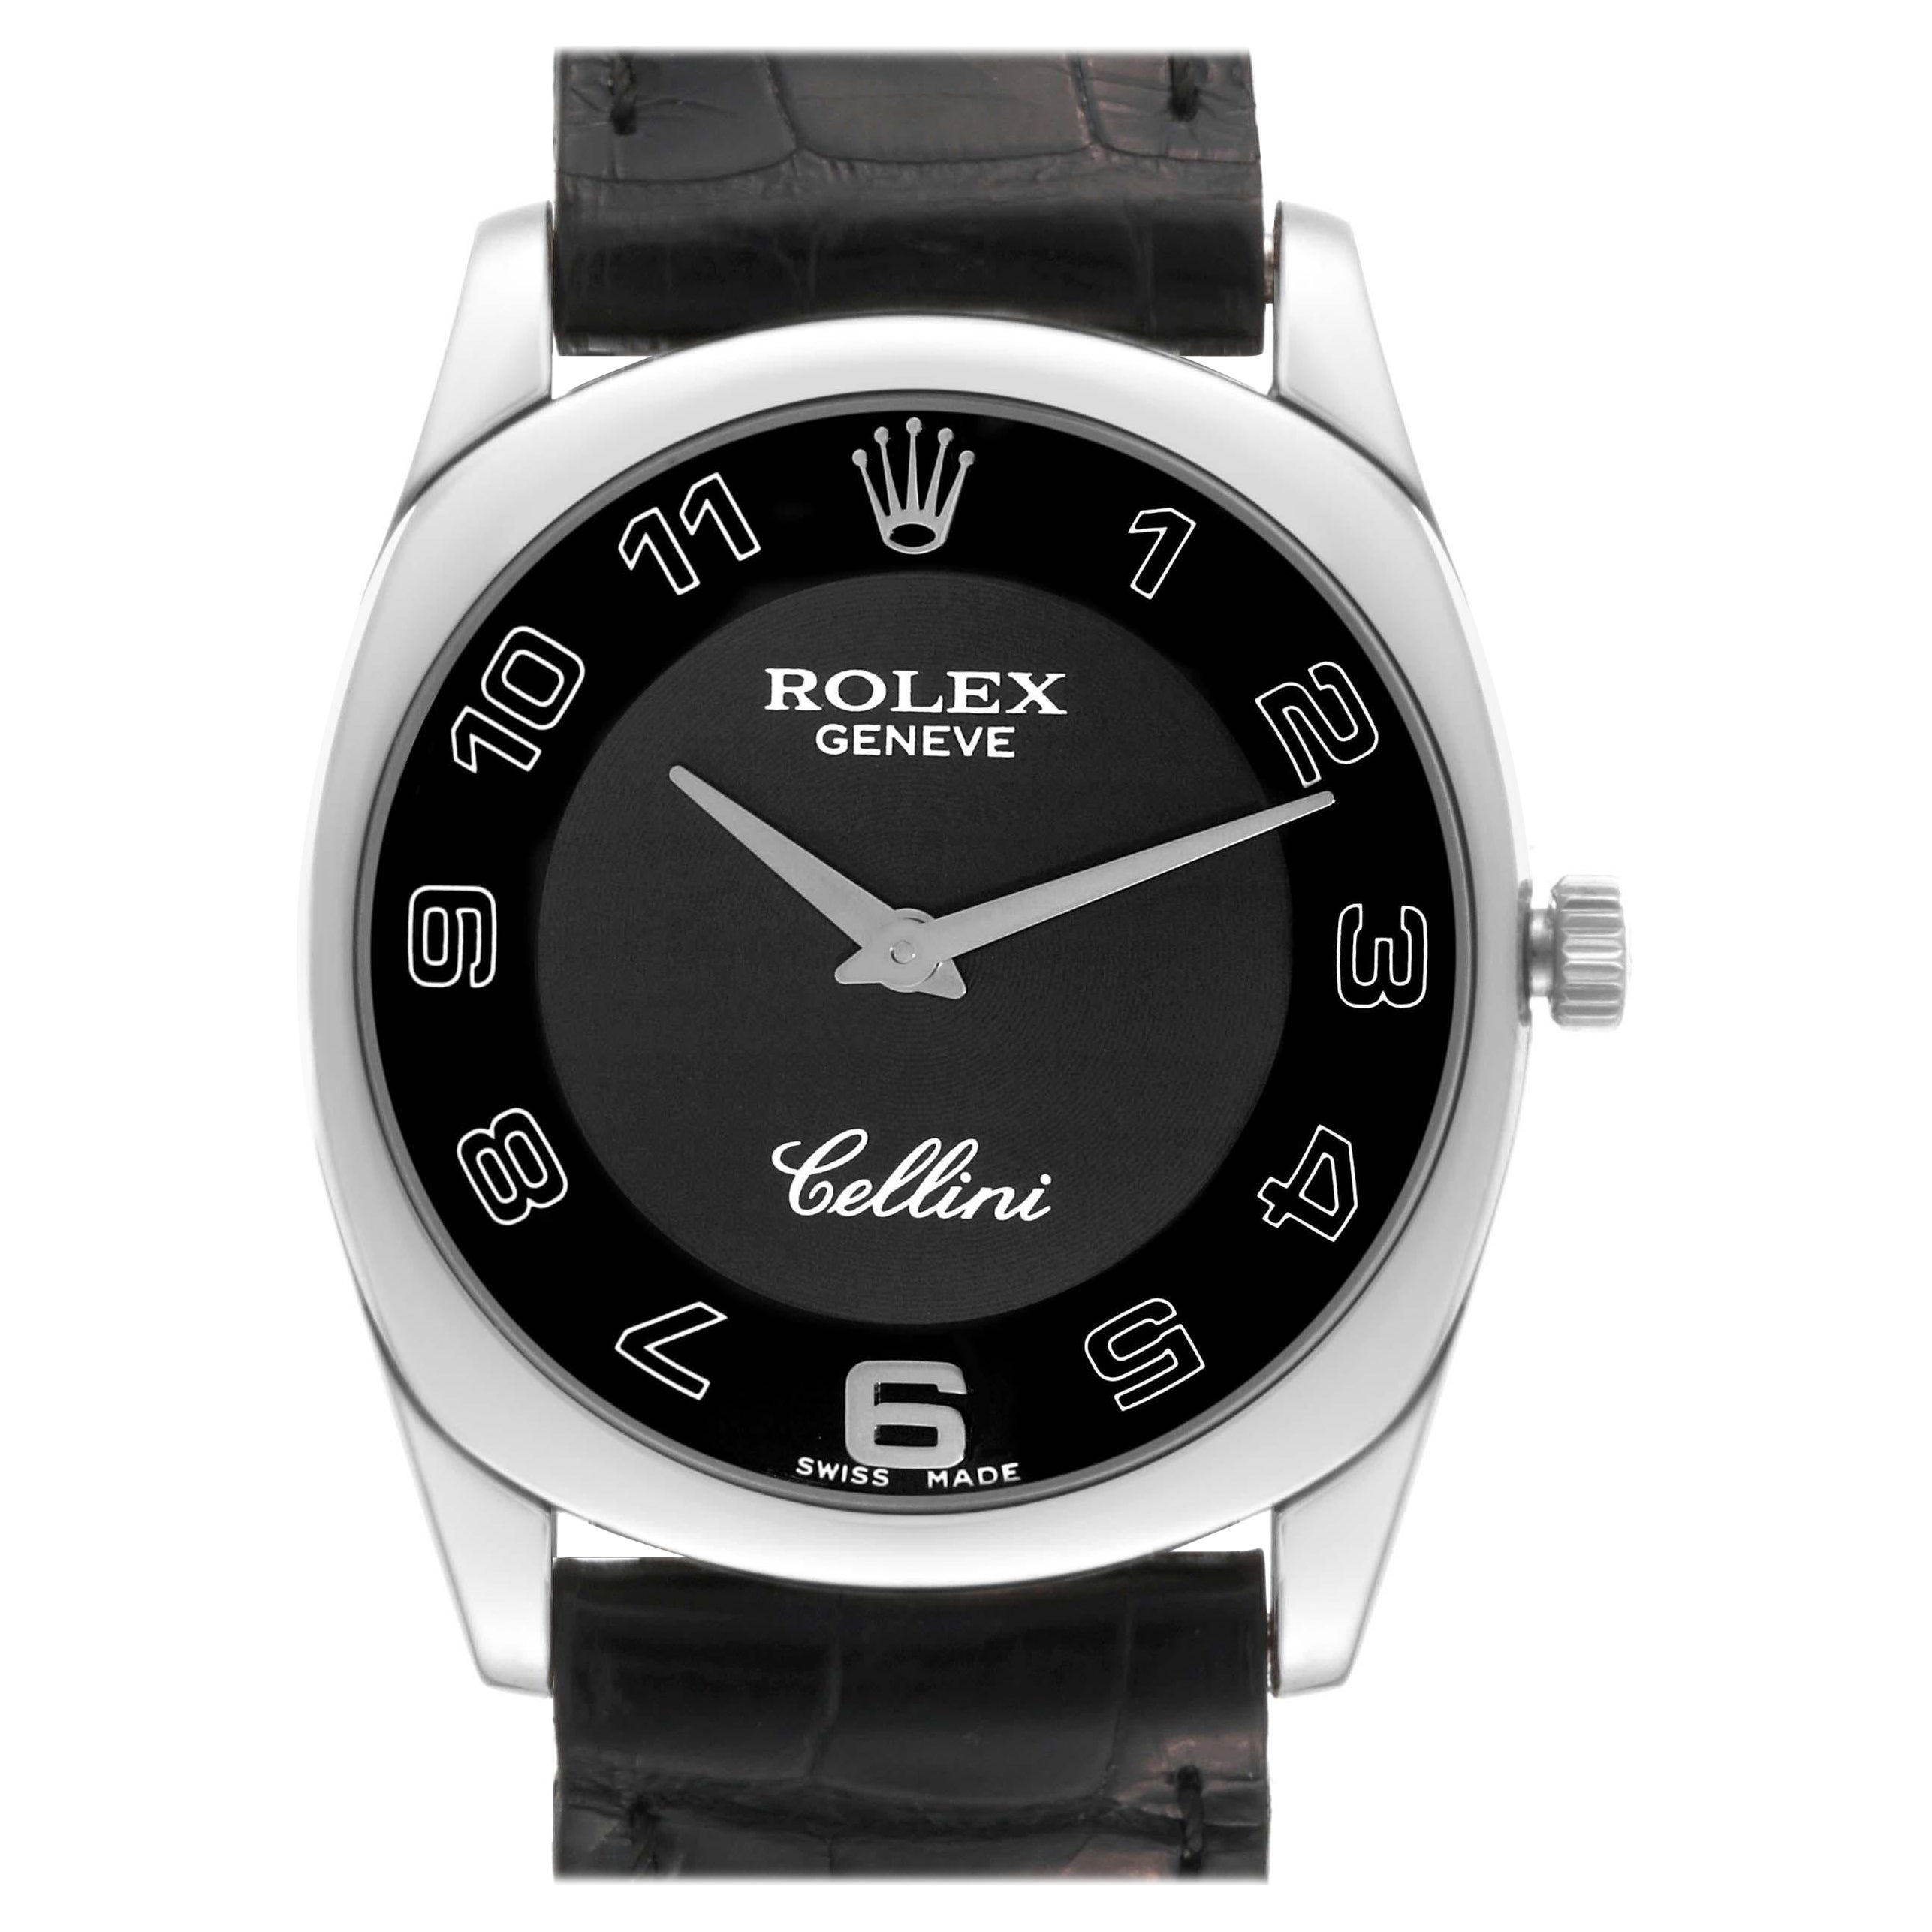 Rolex Cellini Danaos 18K White Gold Black Dial Mens Watch 4233 Papers